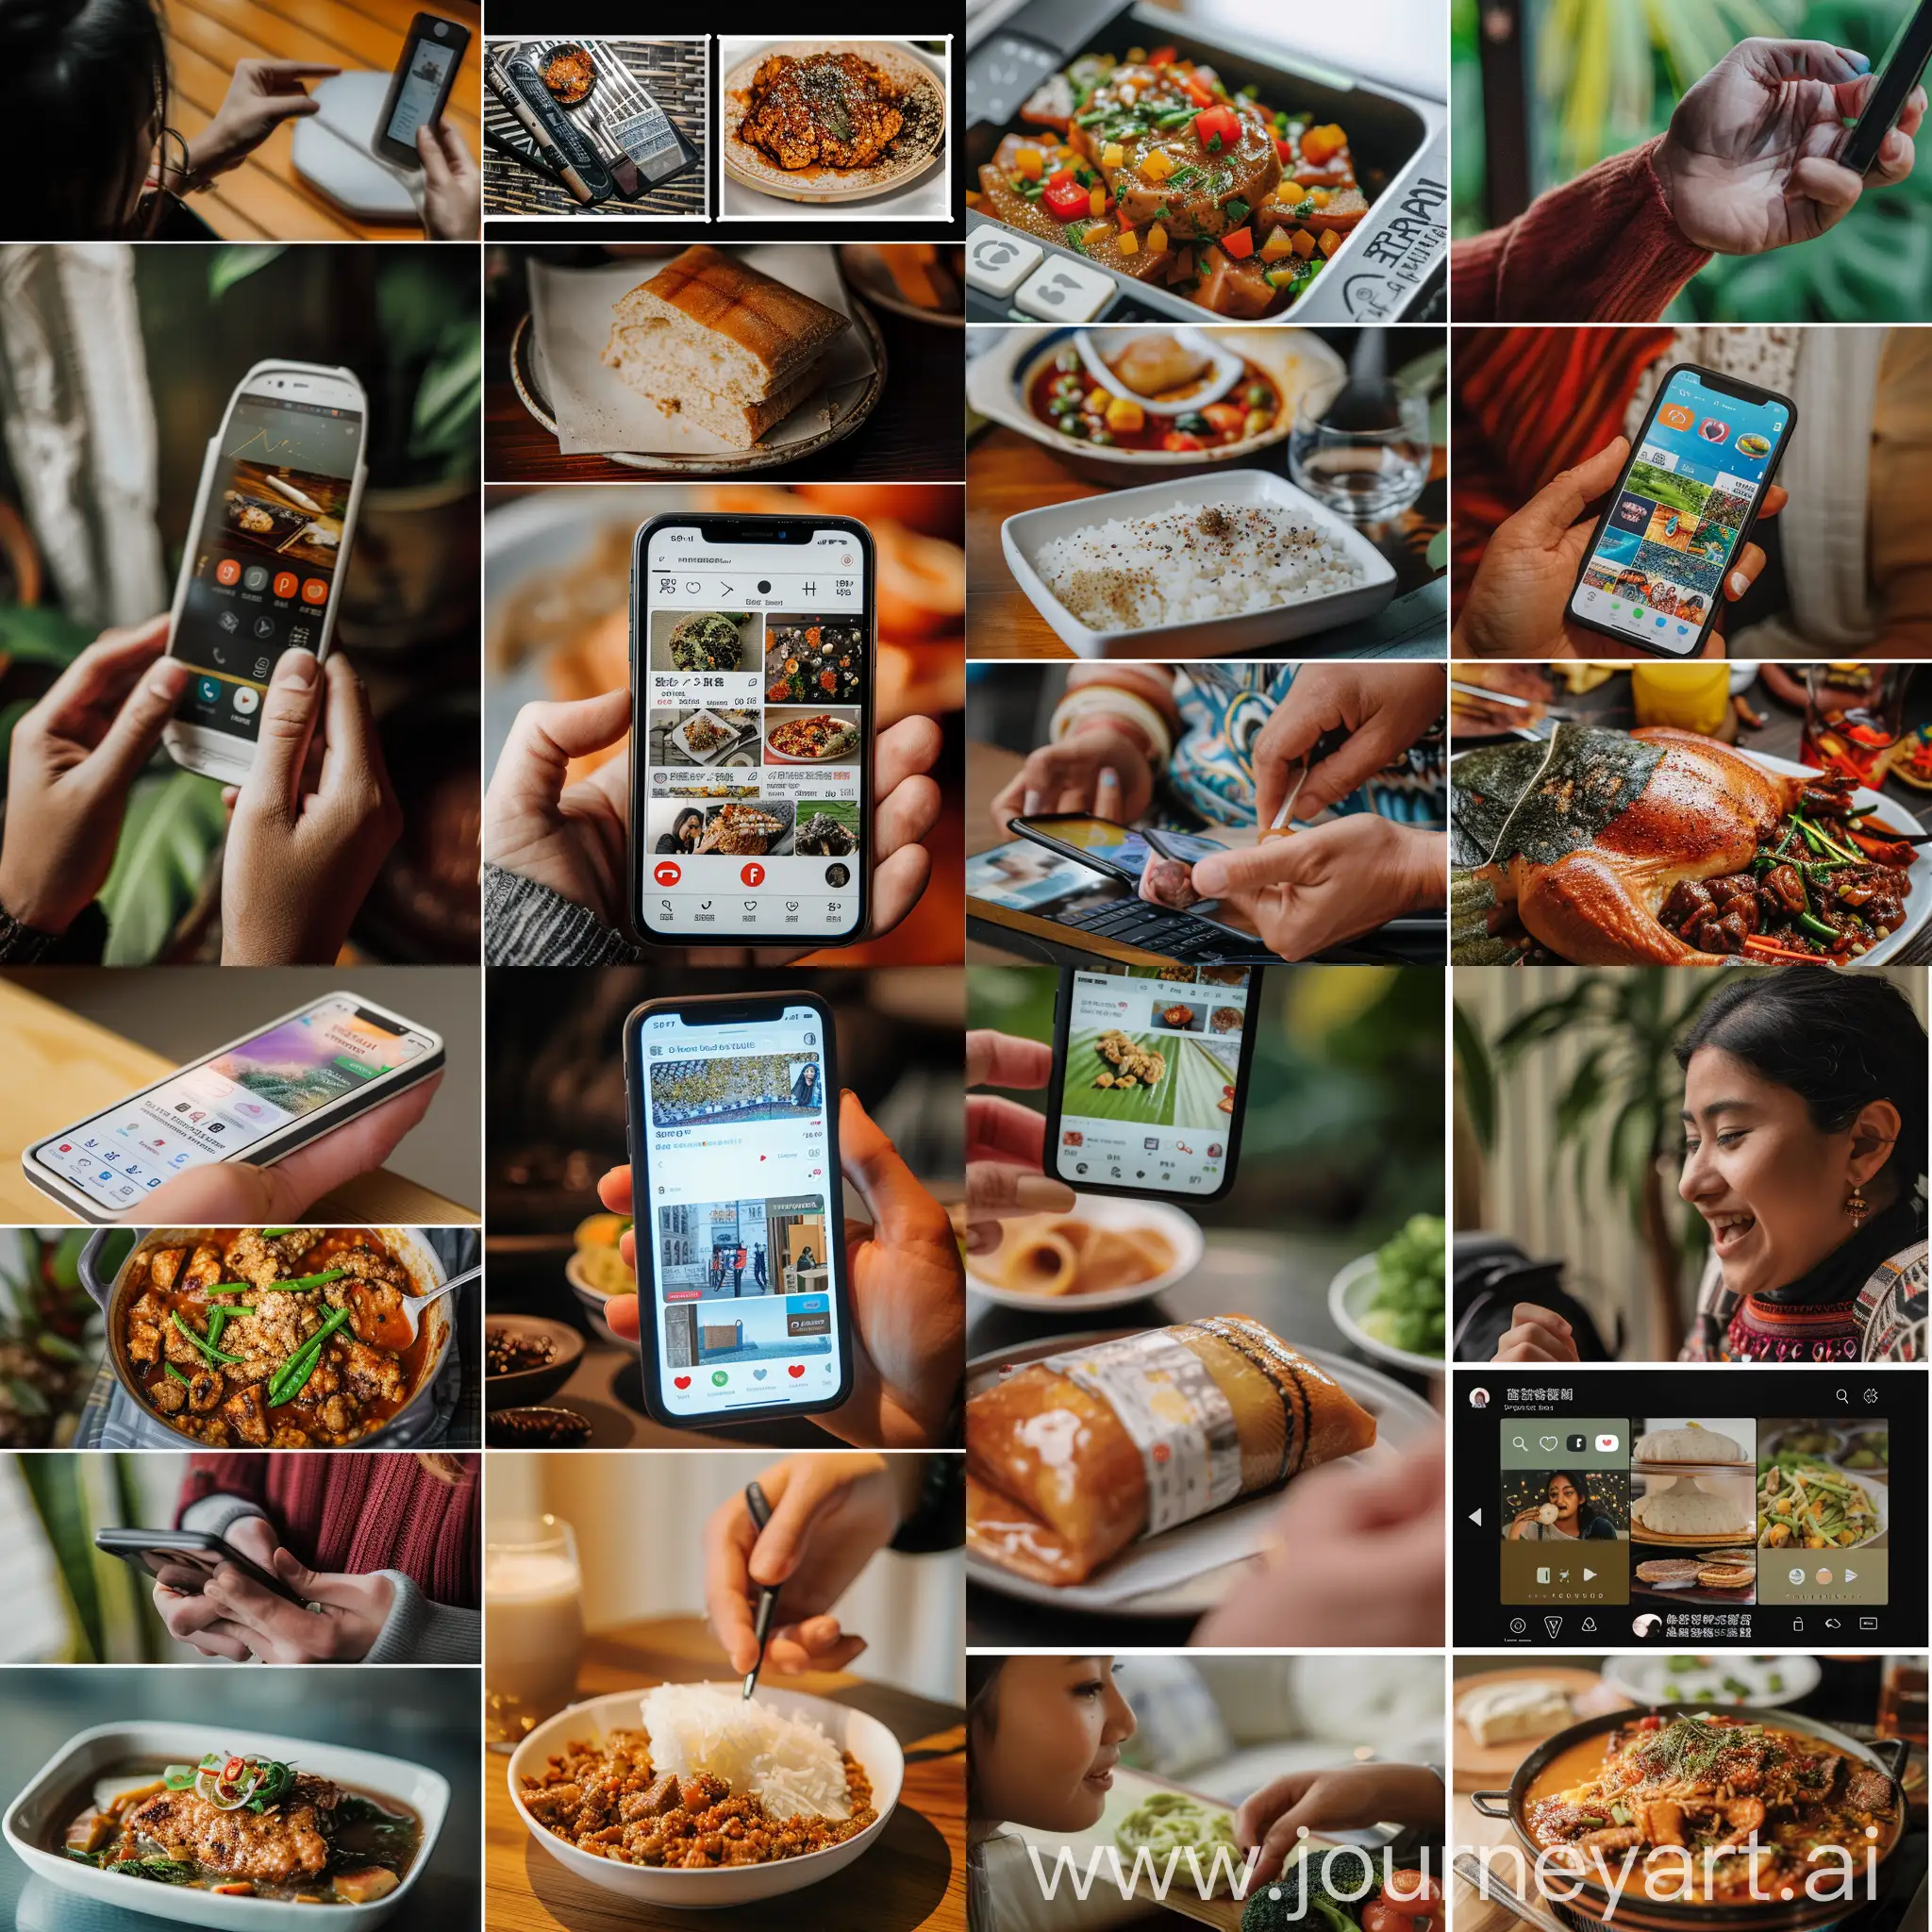 A collage of images representing different aspects of cultural exchange: a person using a language learning app, a social media post showcasing a traditional dish, and someone sharing a story through video chat.*